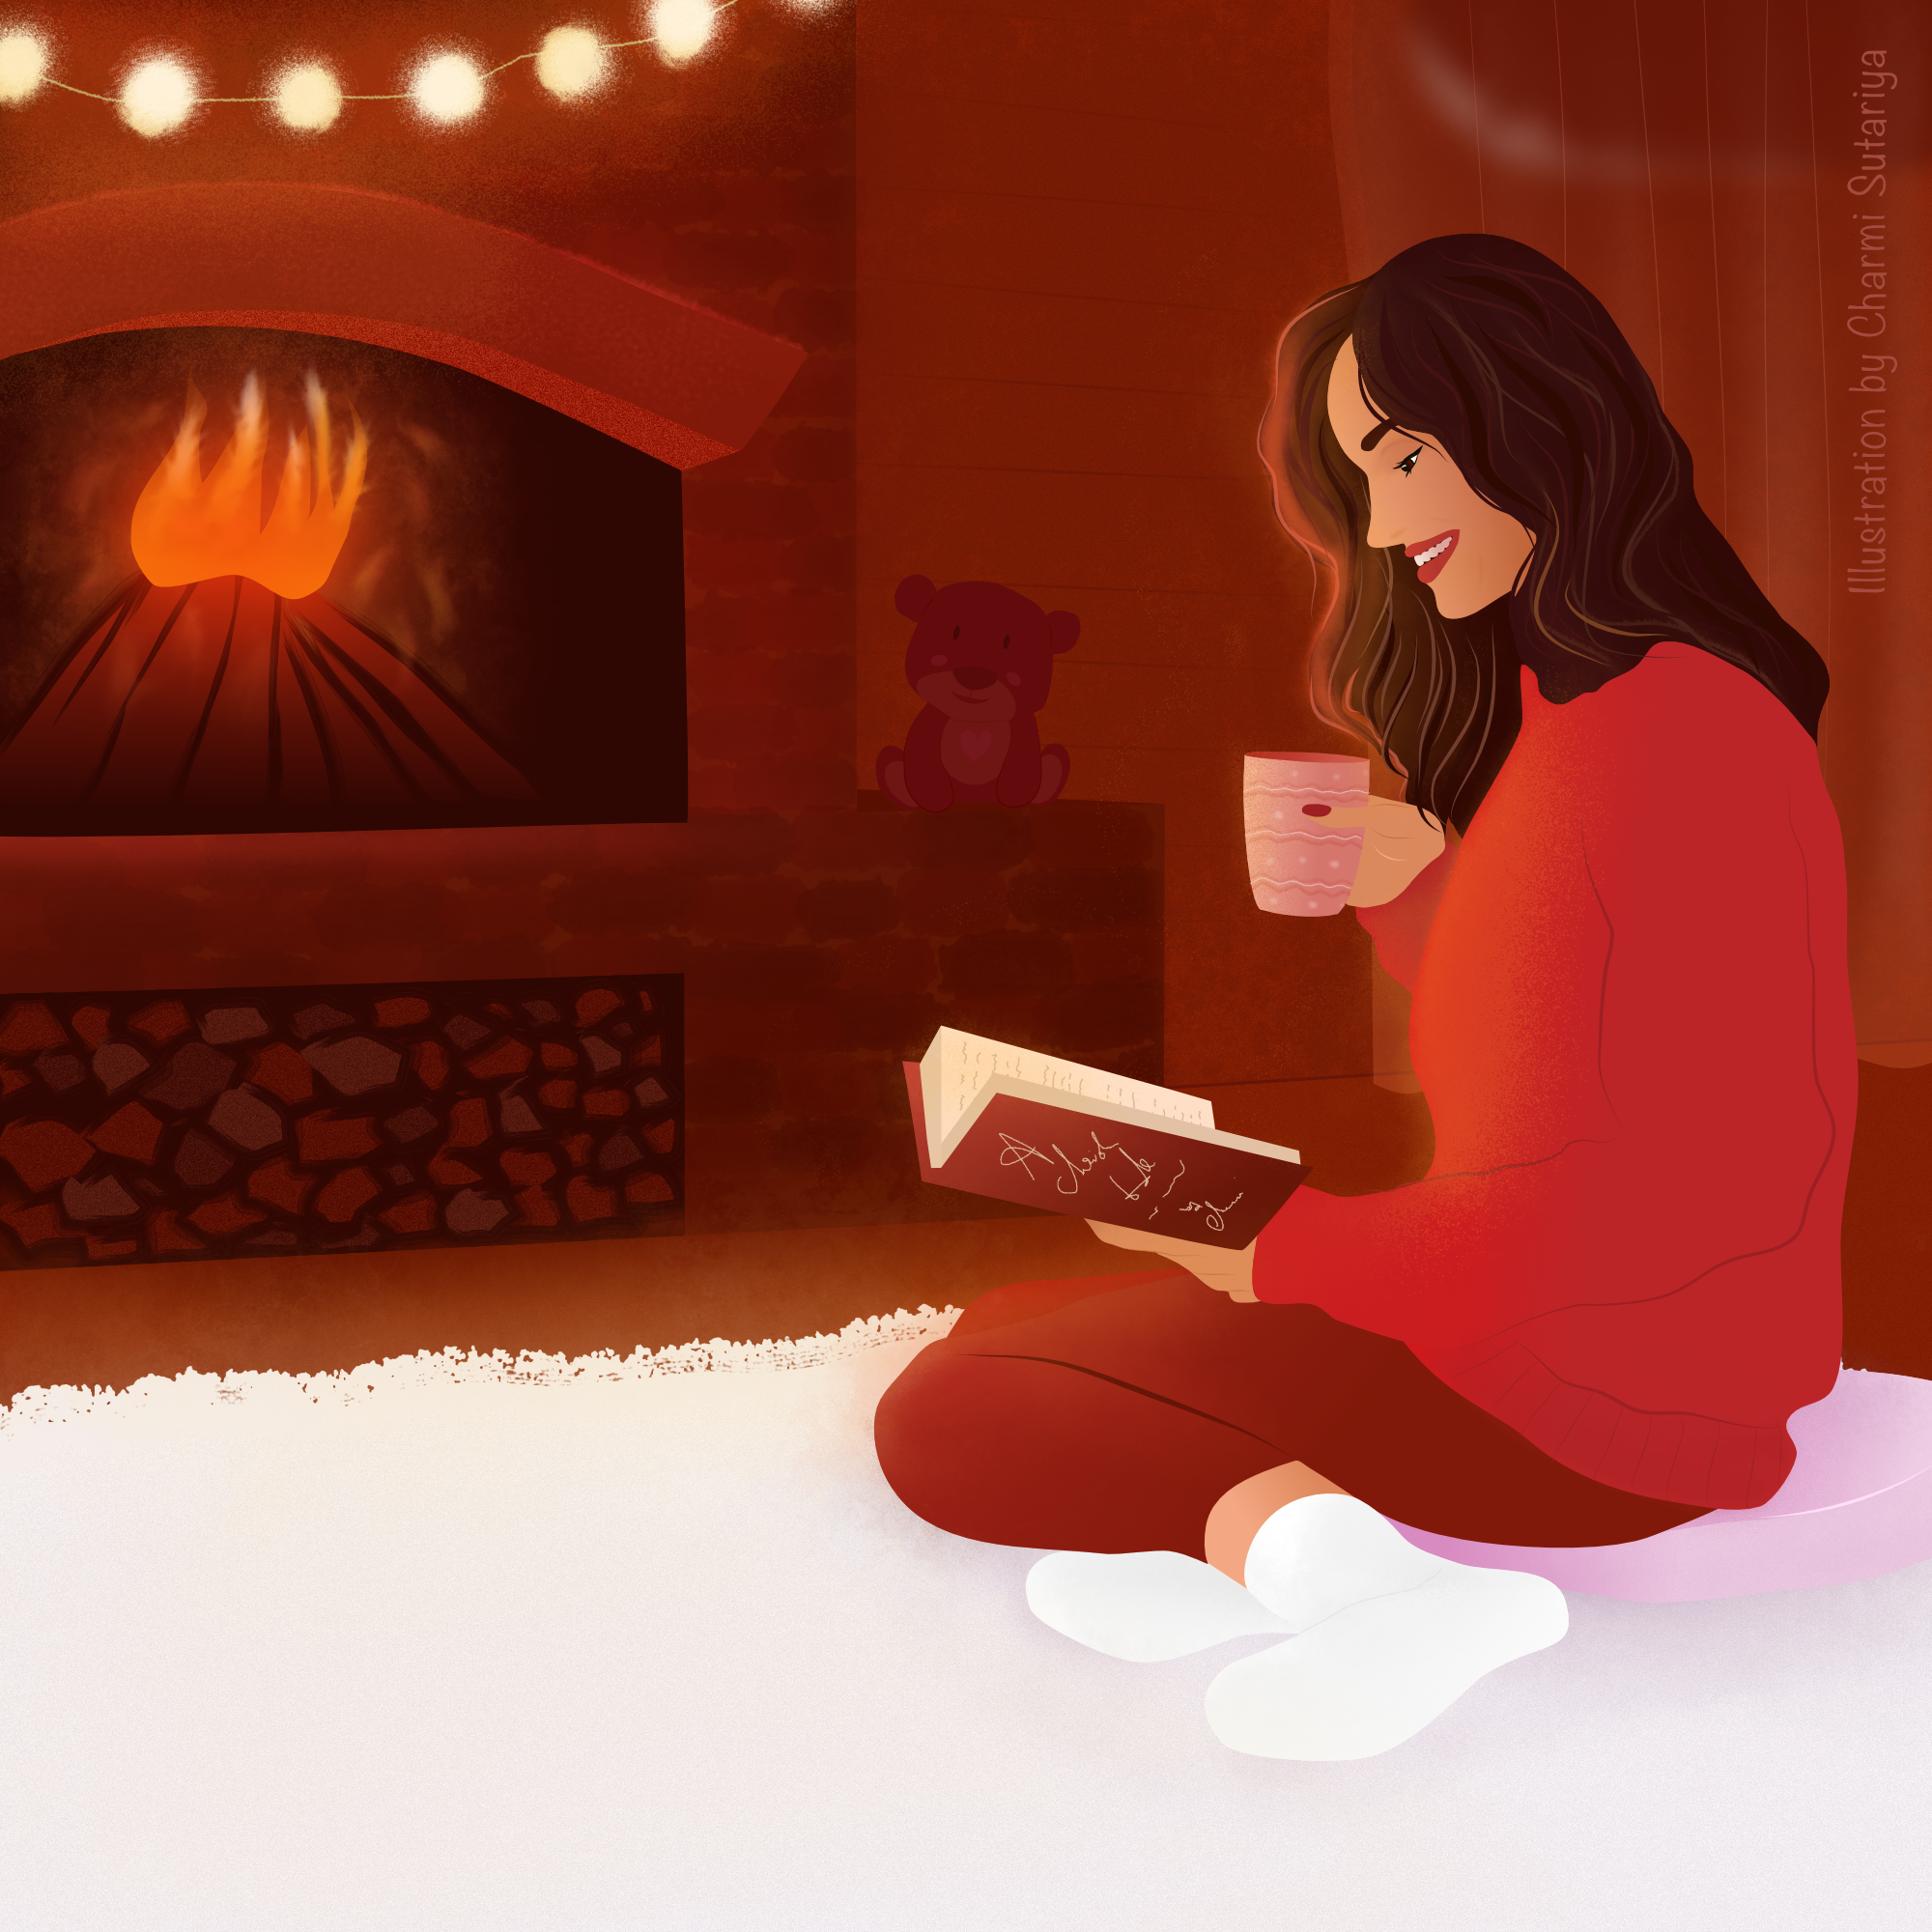 An illustration of a girl reading a book along with a coffee mug by the cozy fireplace on a winter night.